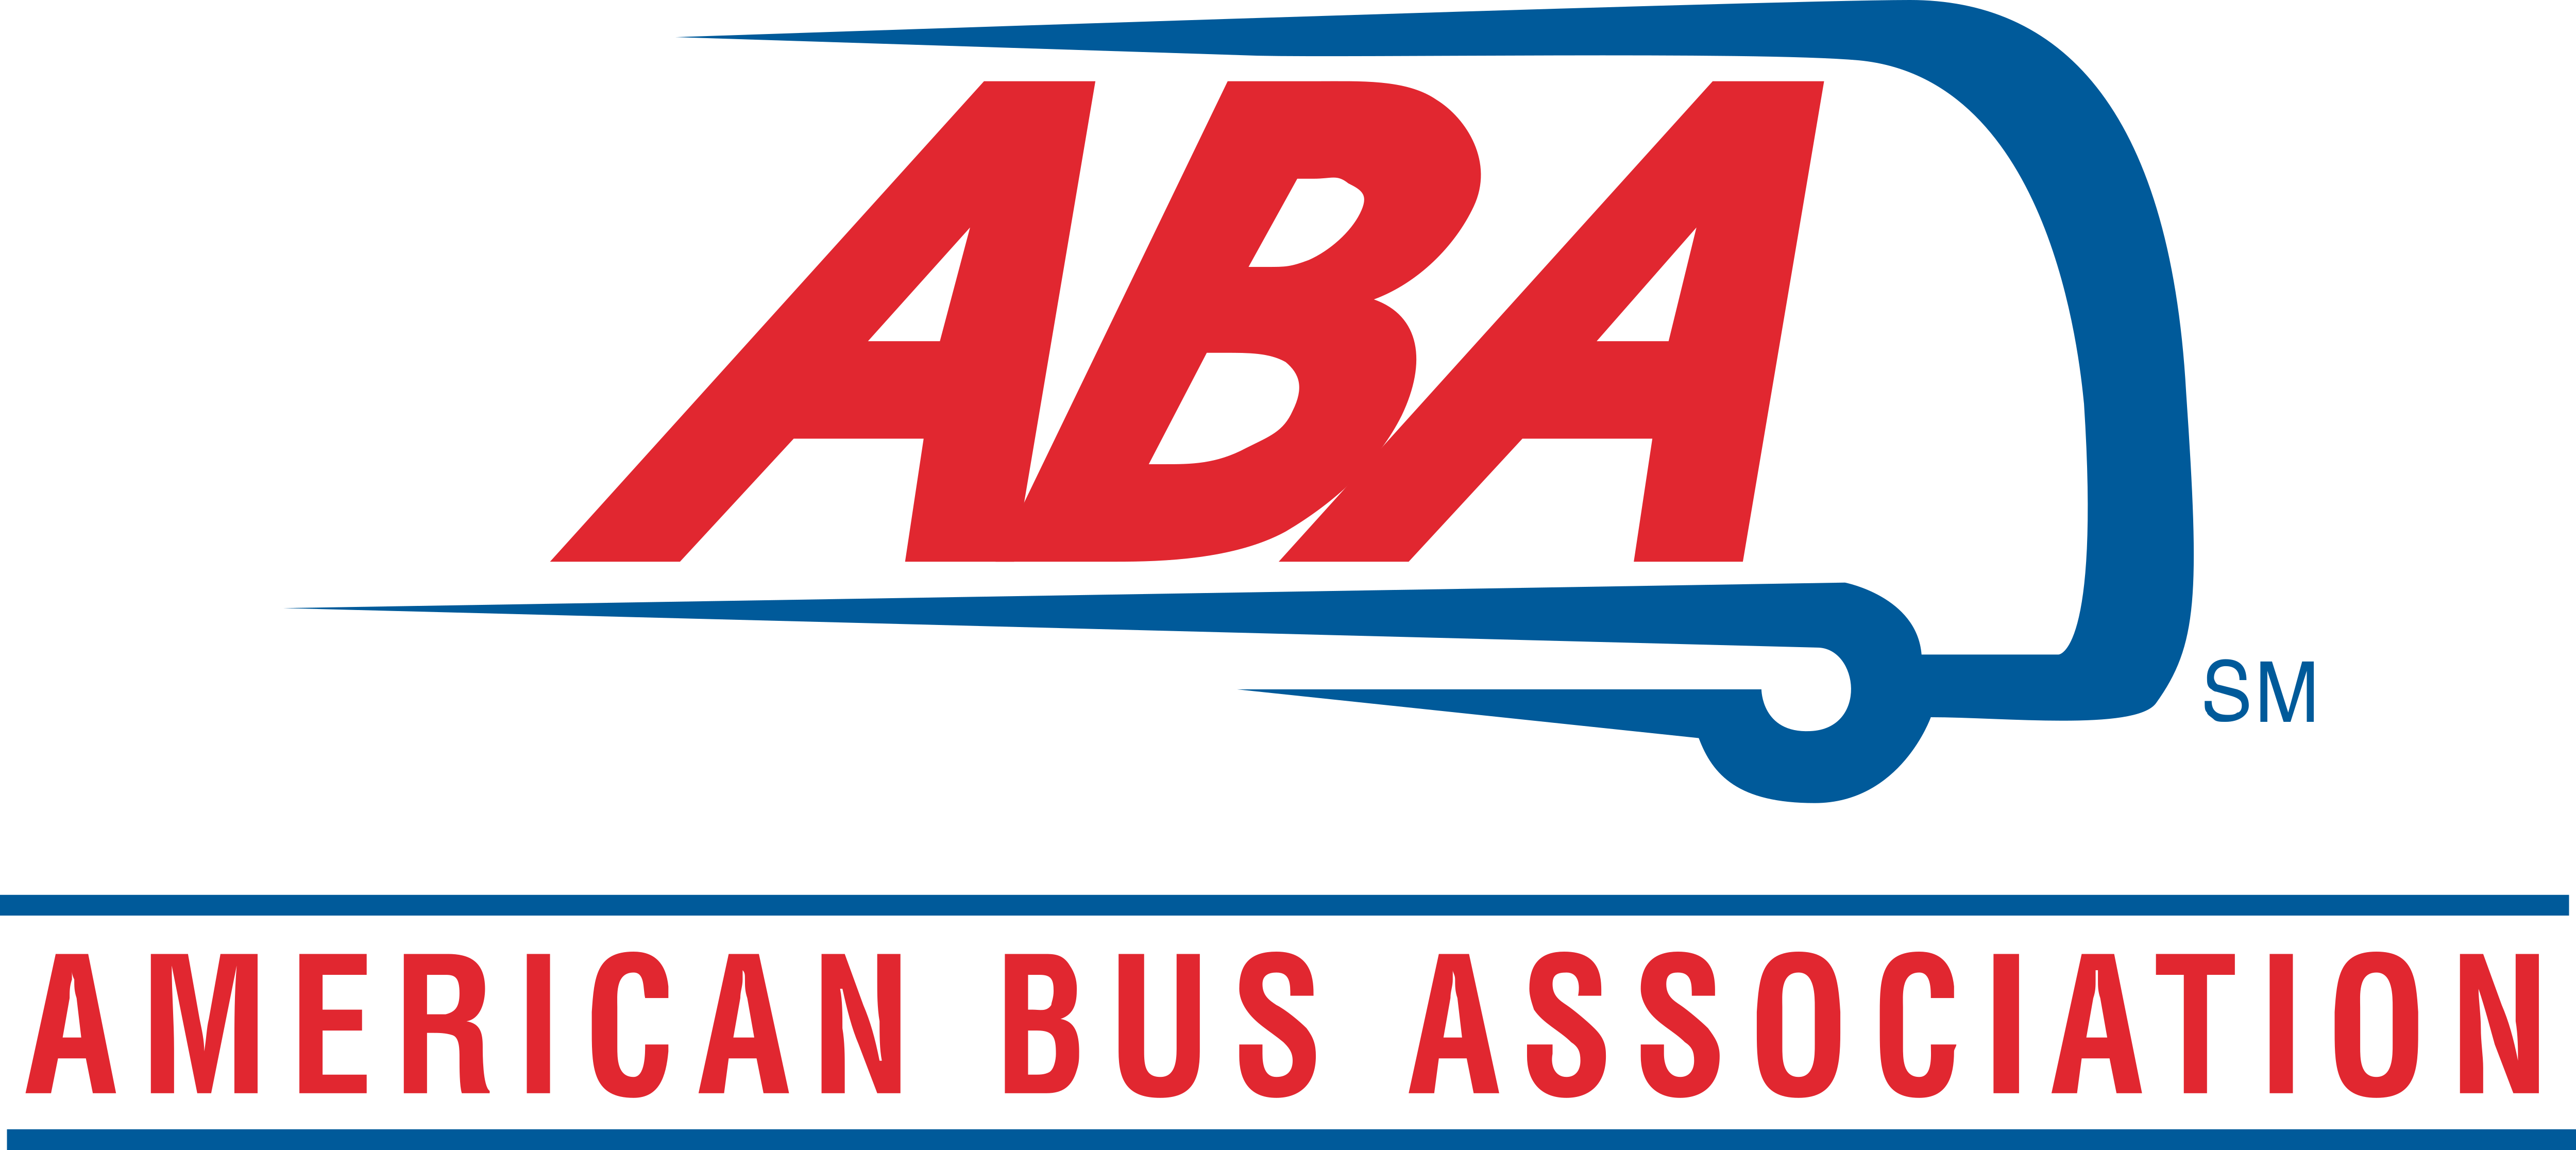 Nationwide Bus Charter is a member of the American Bus Association